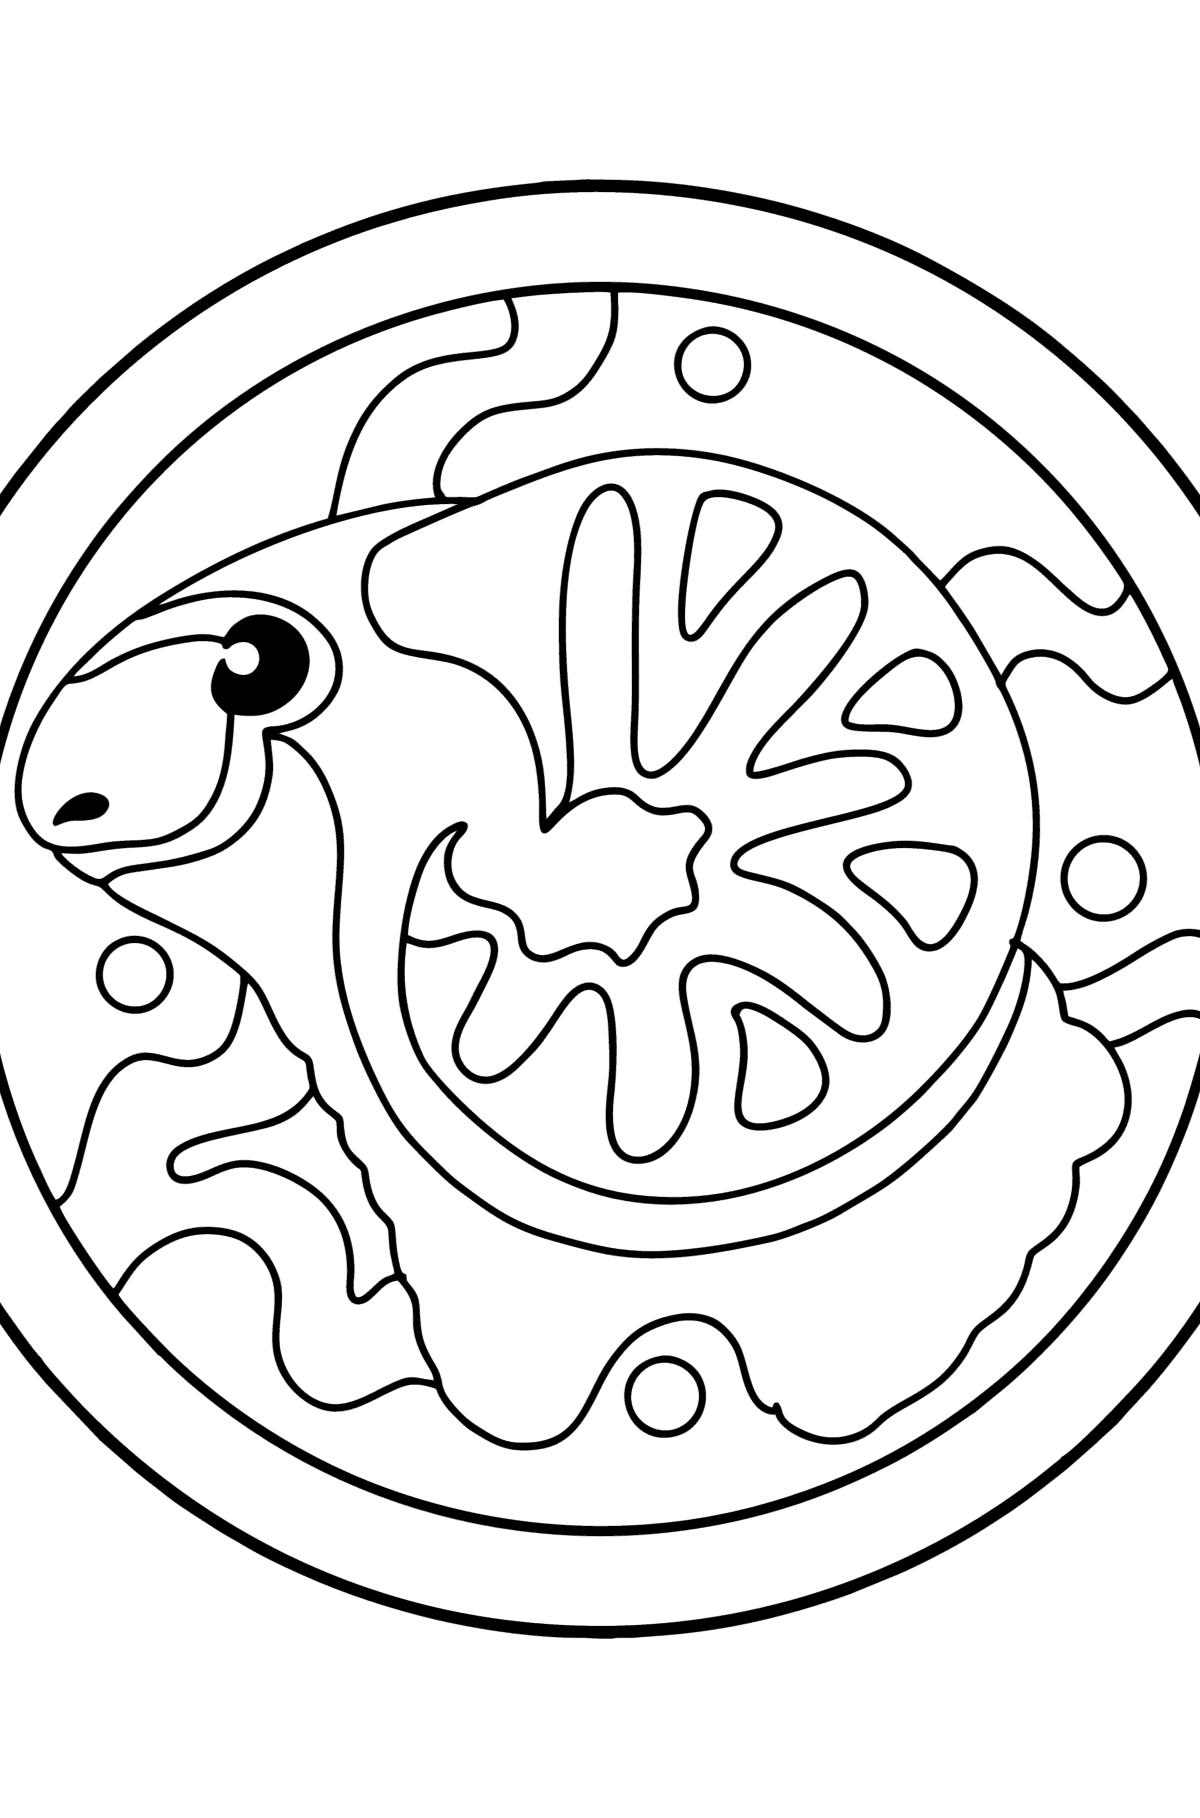 Coloring page for kids - zodiac sign Aries - Coloring Pages for Kids